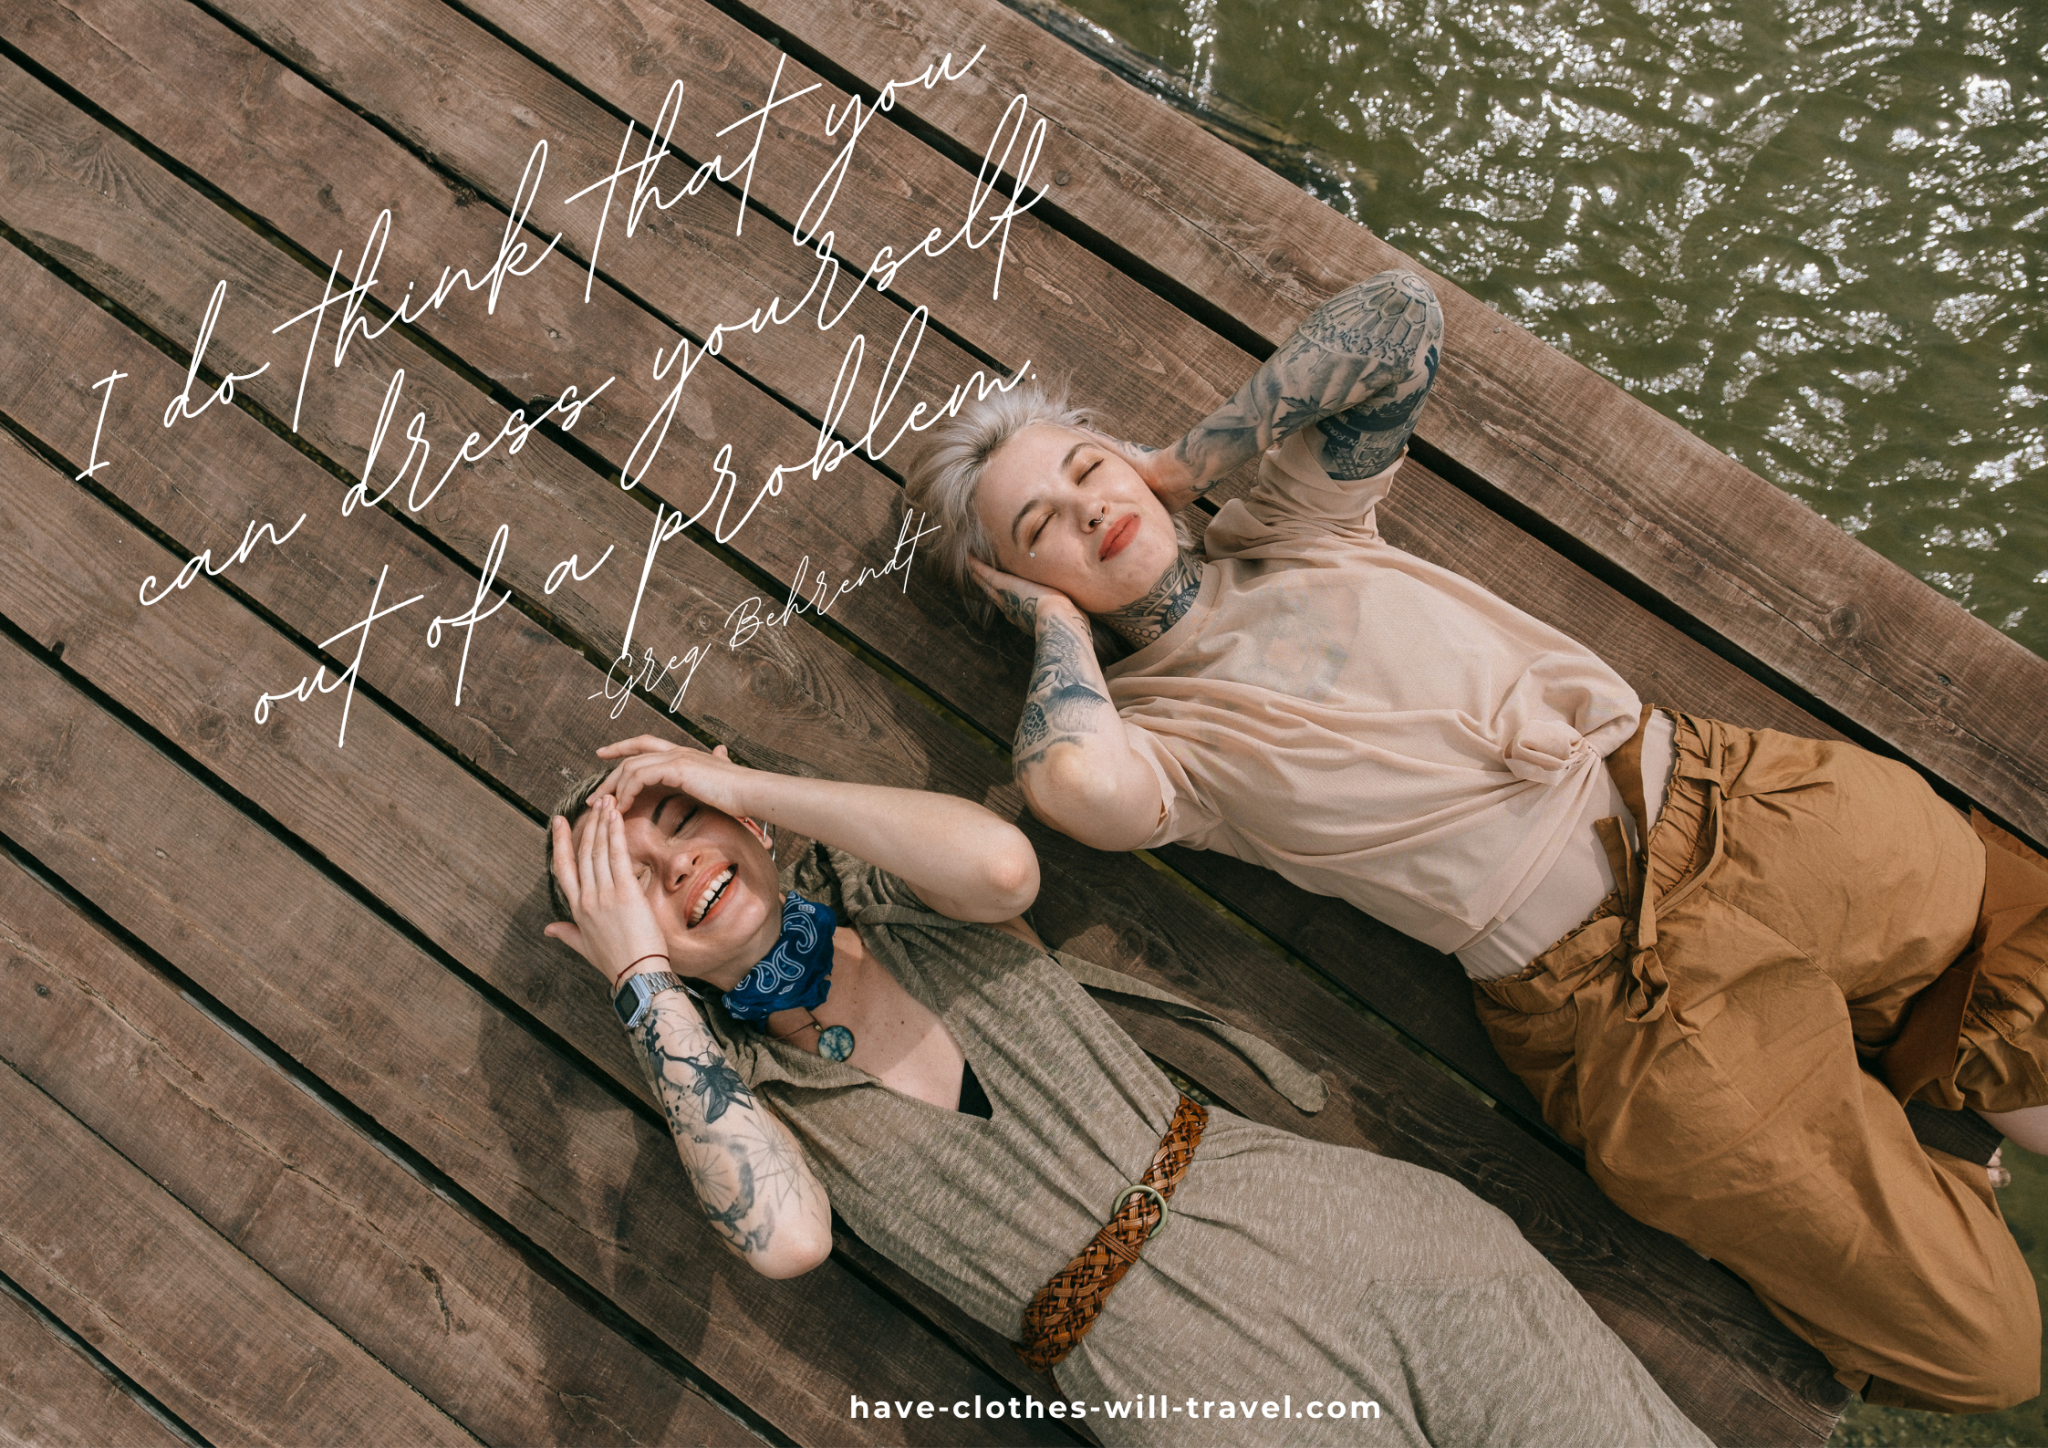 Two tattooed women lay side by side on a wooden pier next to water. They're laughing, and both wearing neutral colored clothing. Text on the image says, "I do think that you can dress yourself out of a problem. - Greg Behrendt"